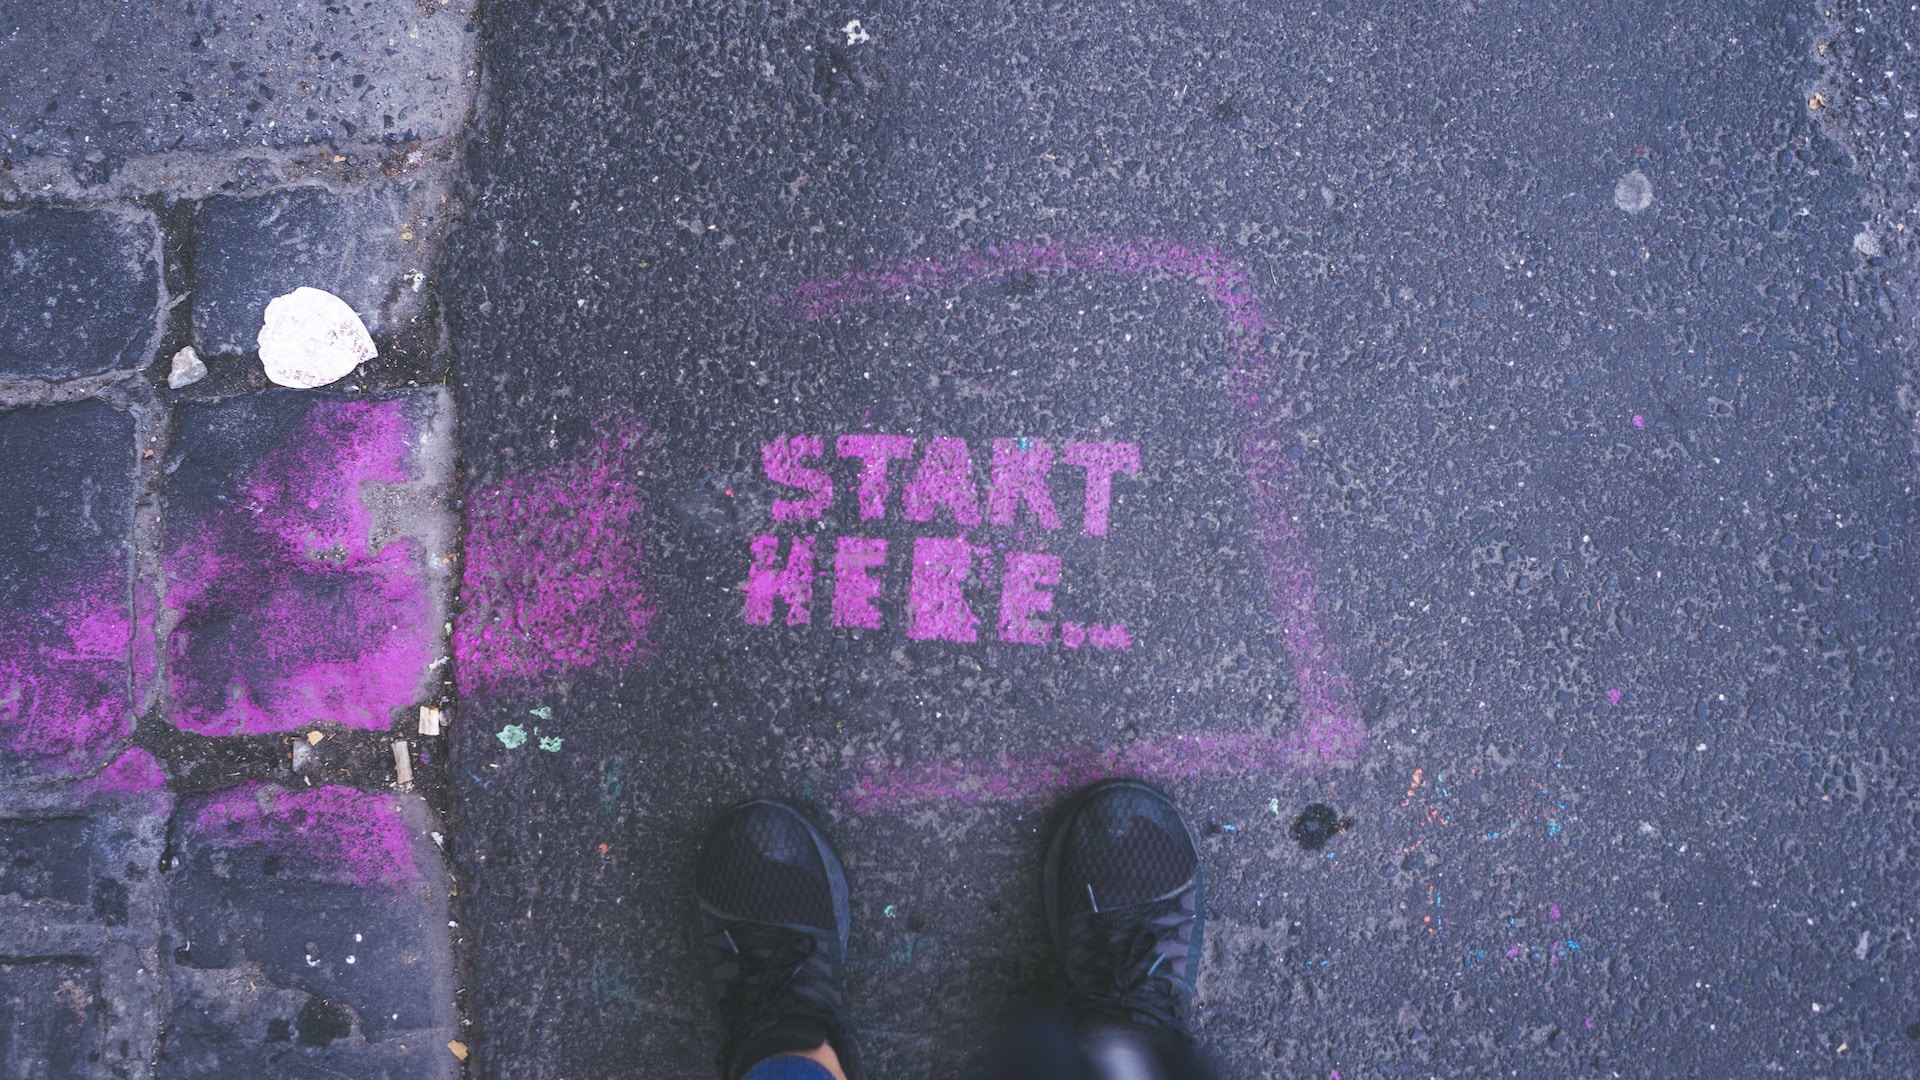 Description: an overhead photo of a street with the words 'start here' written in hot-pink paint/chalk.  A person's running shoes are seen at the bottom of the frame. Photo by Gia Oris on Unsplash.